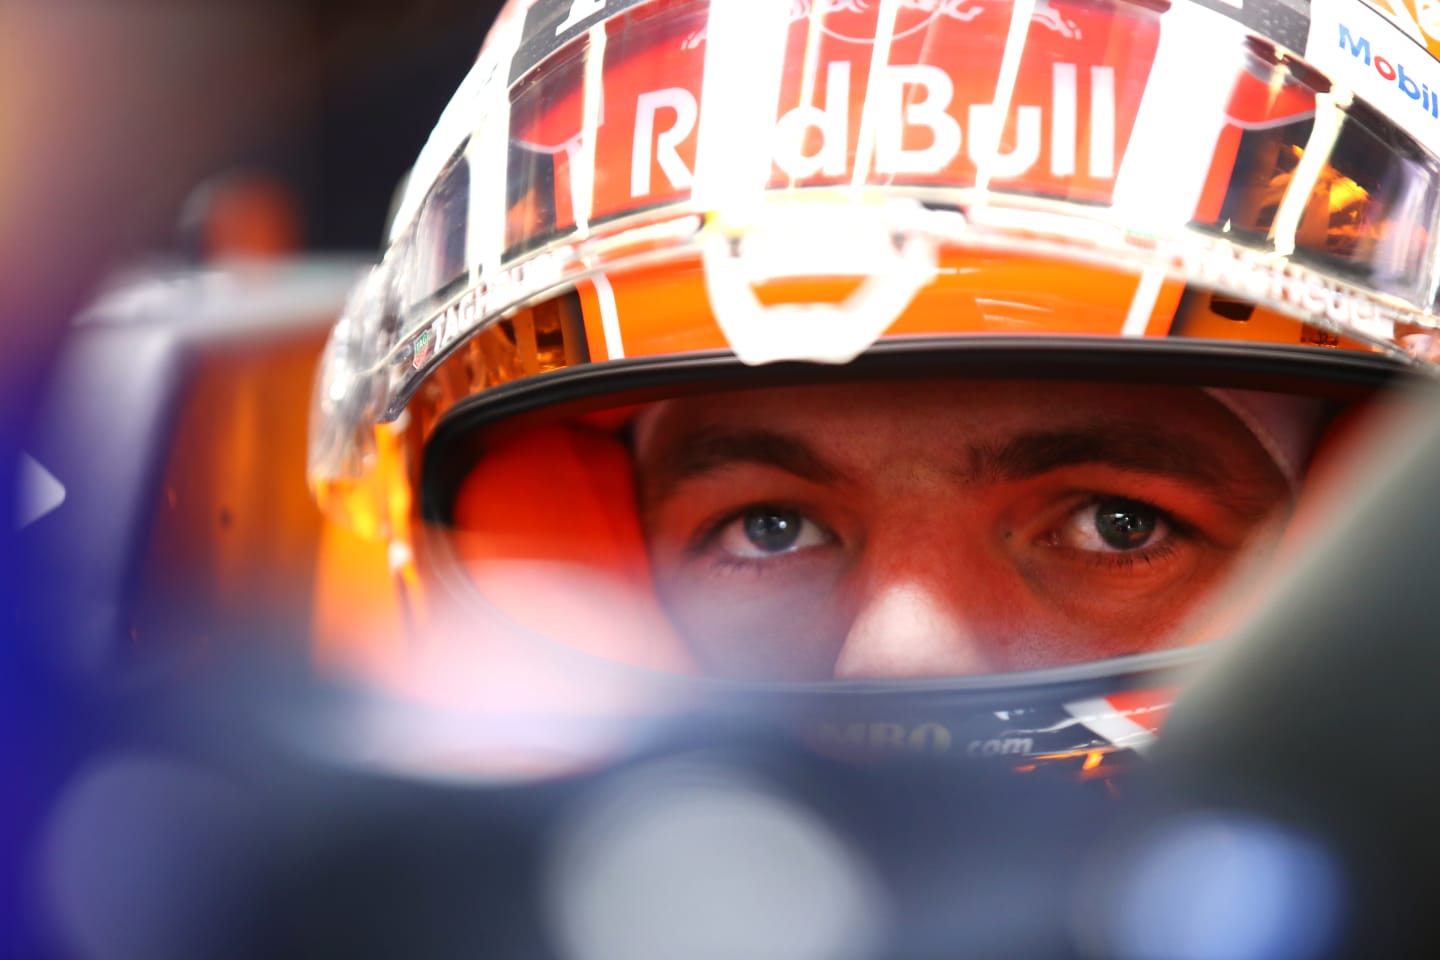 SPA, BELGIUM - AUGUST 28: Max Verstappen of Netherlands and Red Bull Racing prepares to drive in the garage during qualifying ahead of the F1 Grand Prix of Belgium at Circuit de Spa-Francorchamps on August 28, 2021 in Spa, Belgium. (Photo by Mark Thompson/Getty Images)